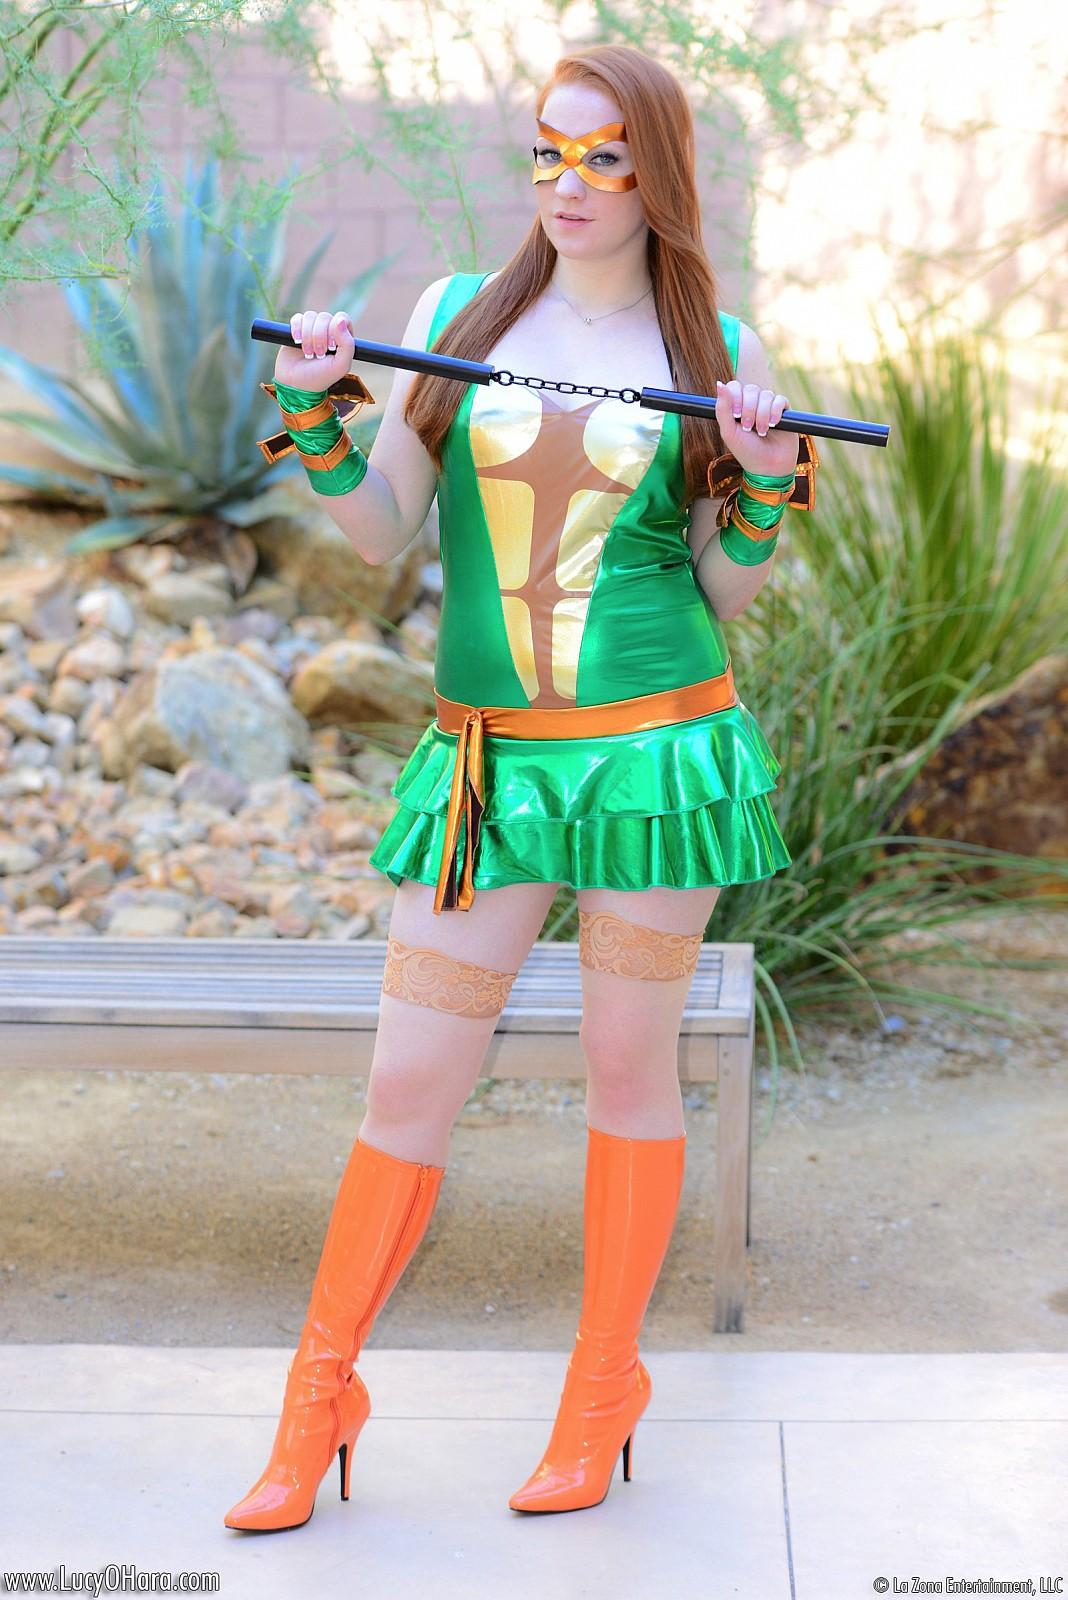 Lucy Ohara dresses up in a ninja turtle cosplay outfit and gets down and dirty with her nunchucks #59120110